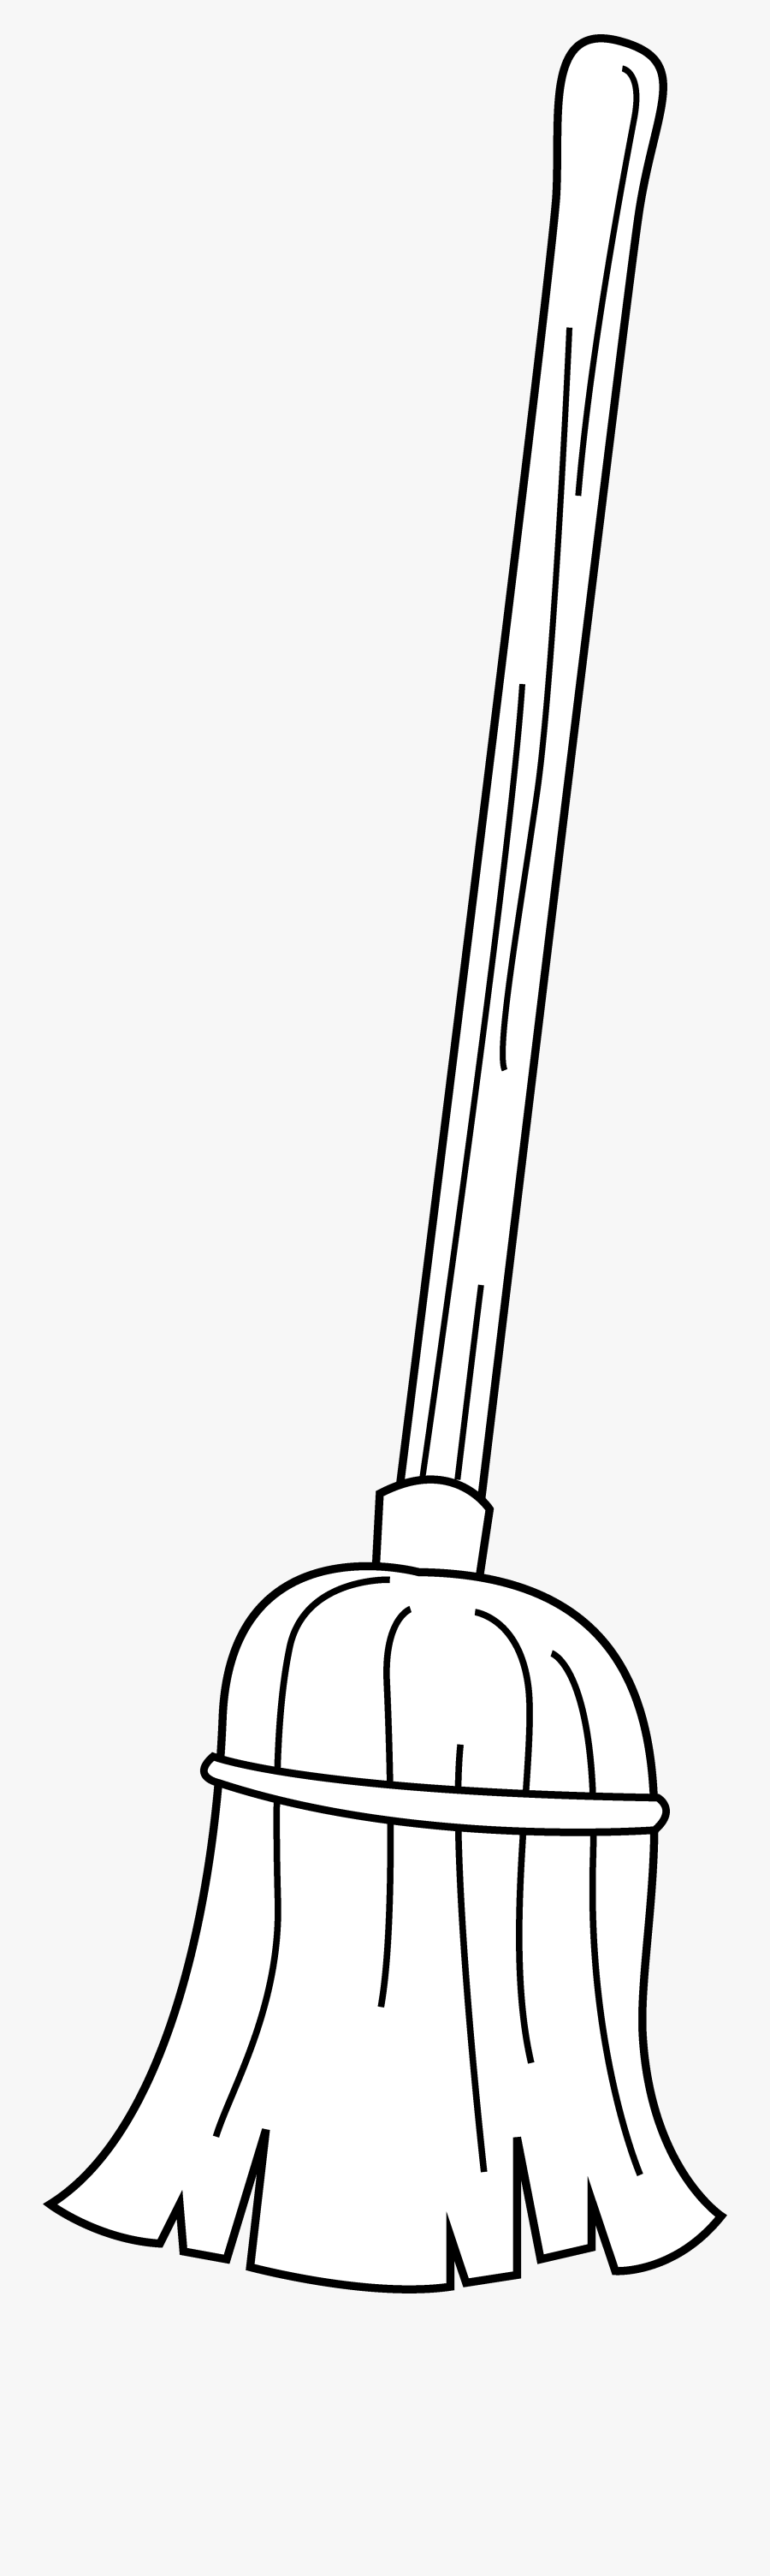 Mop Coloring Pages - Broom Clipart Black And White, Transparent Clipart